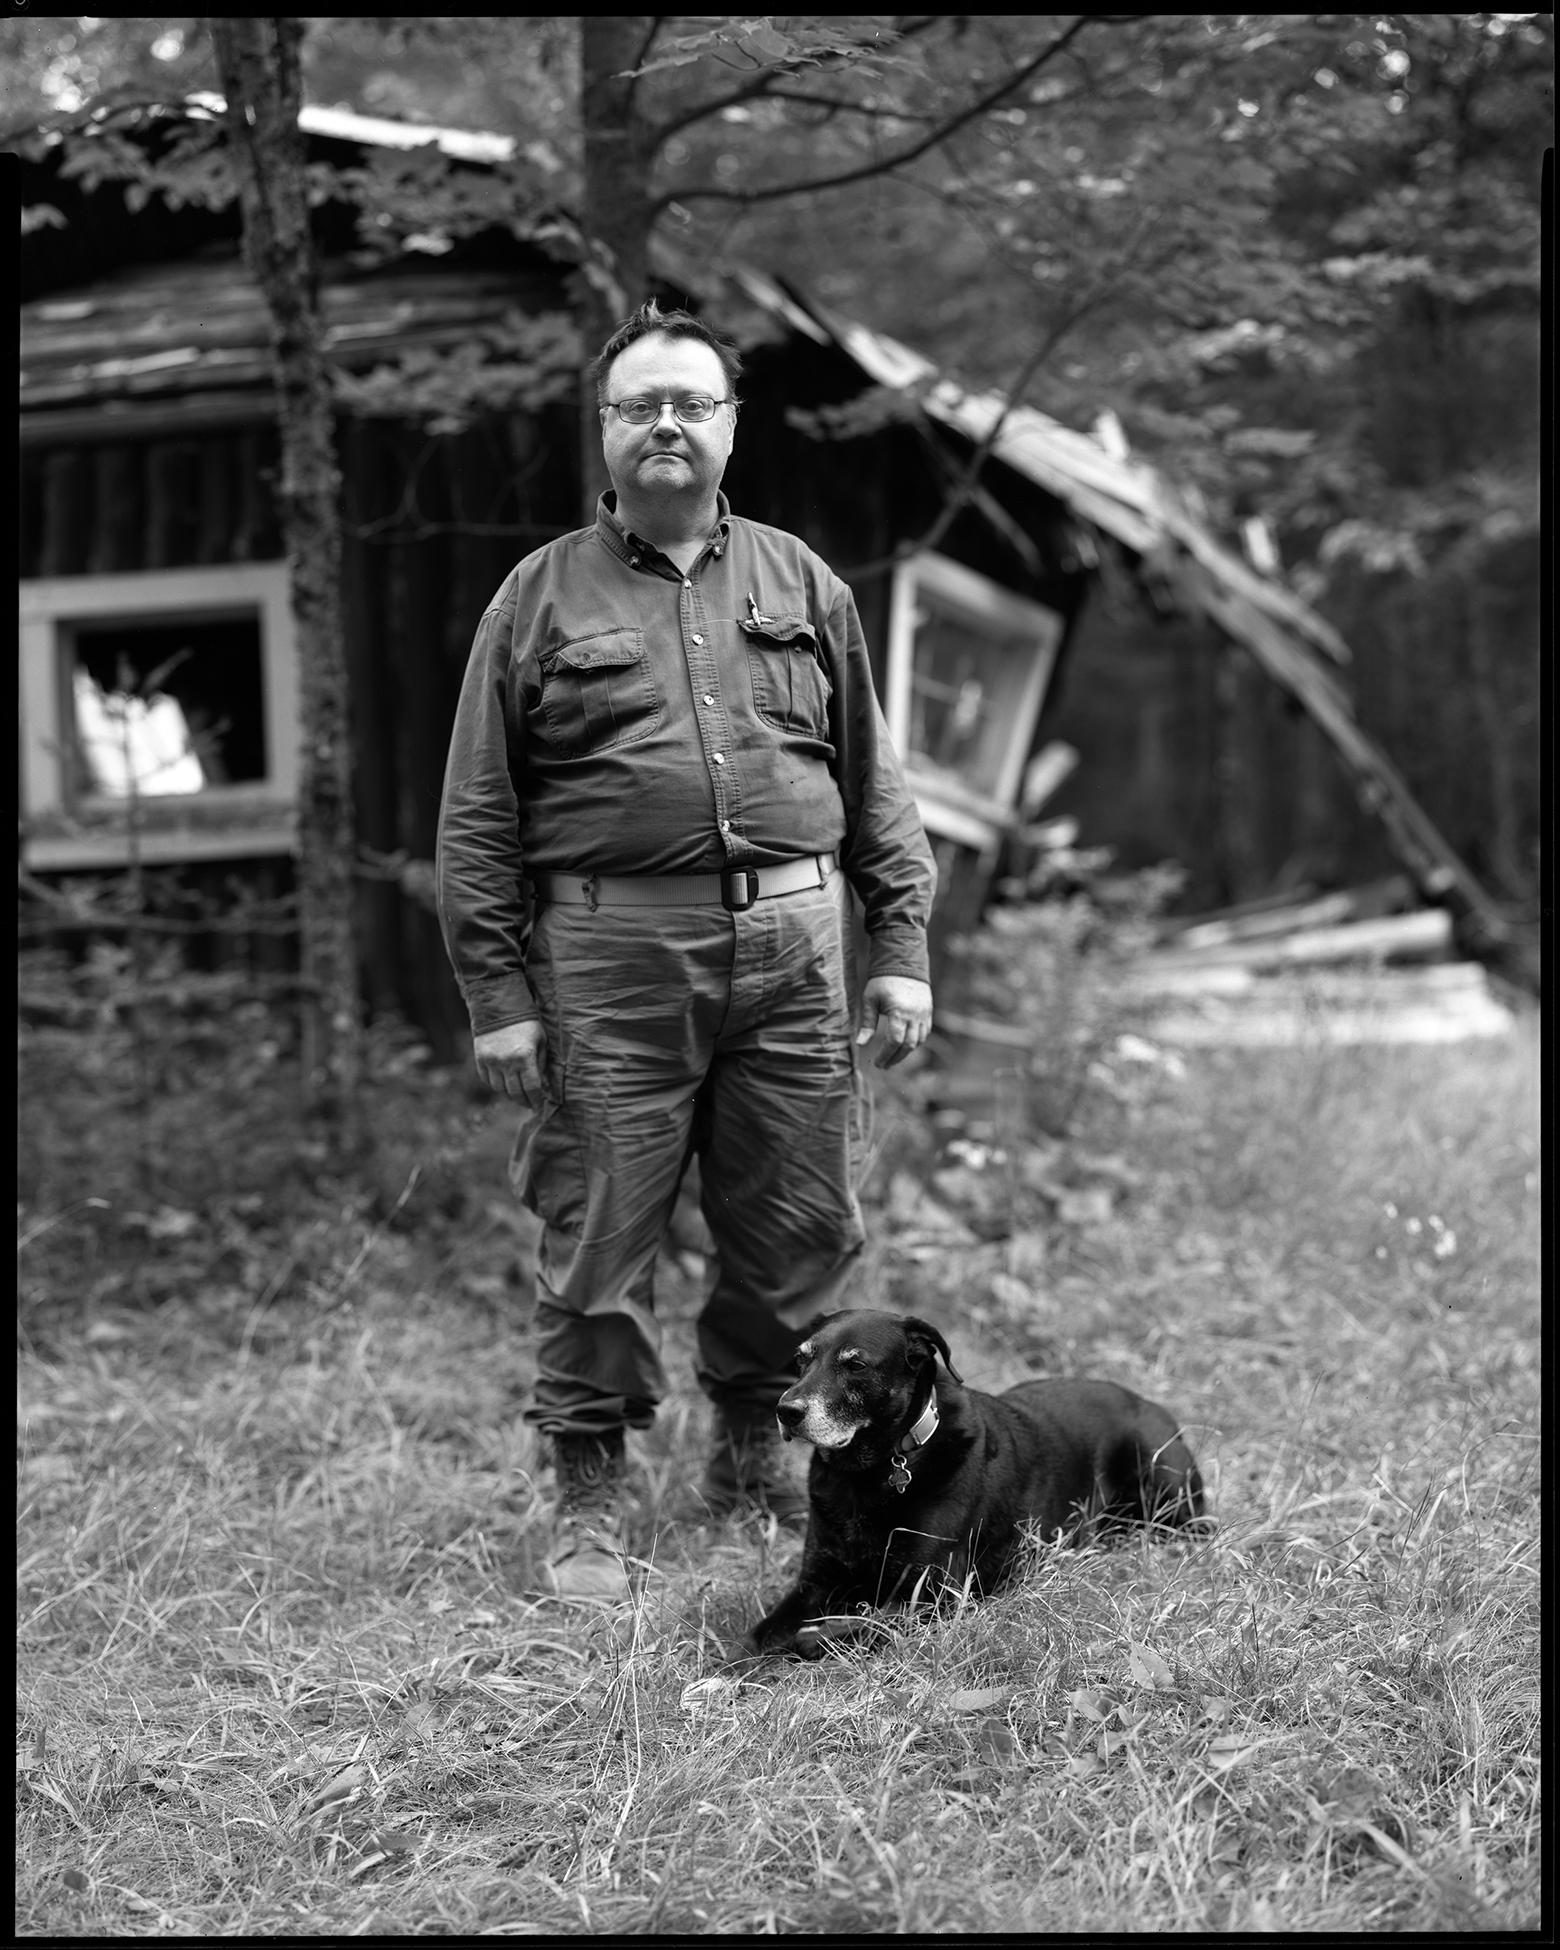 John looks into the camera as he stands outside of the cabin his father and grandfather took him to as a child in Two Harbors, Minnesota. A medium-size black dog is in the grass at his feet.